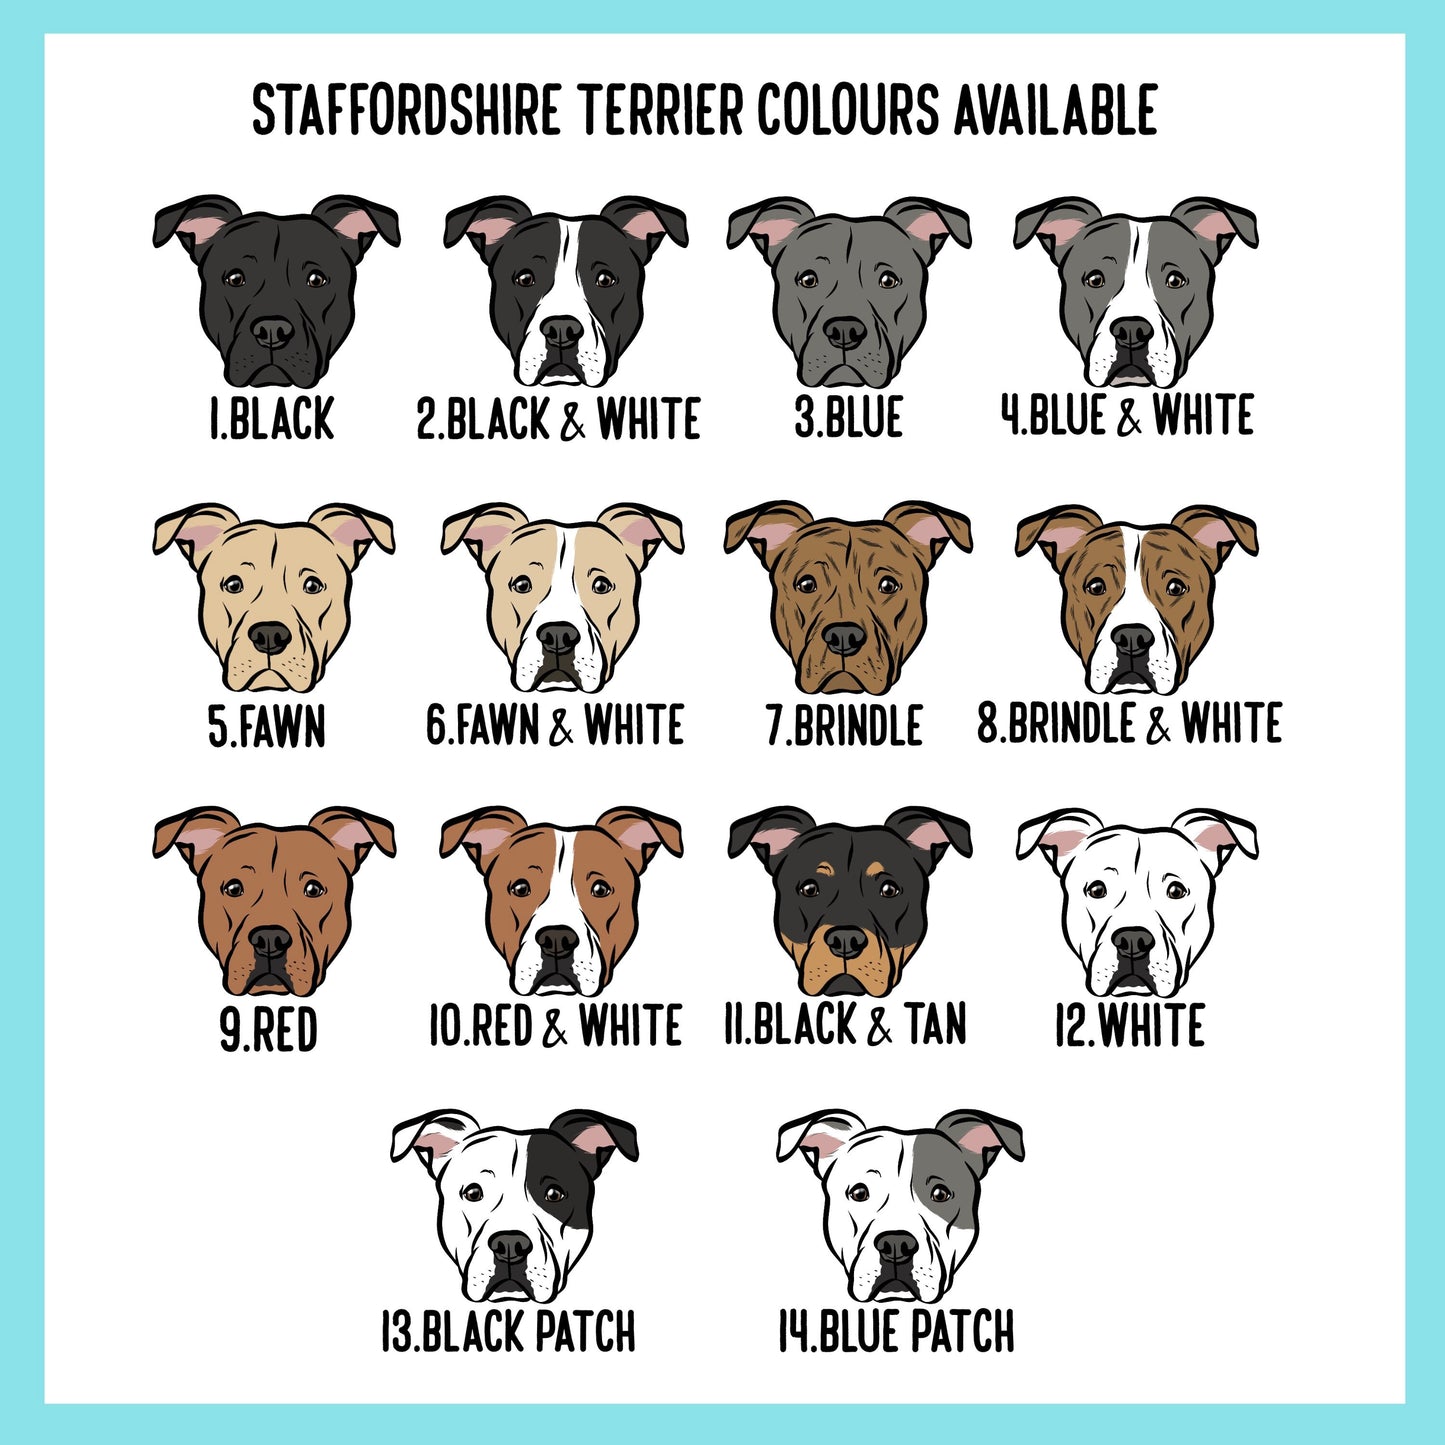 Staffordshire Bull Terrier Collar/ Custom Dog Print Collar/ Personalised Staffy Face Collar/ Dog Collar With Name/ Bully Breed Owner Gifts